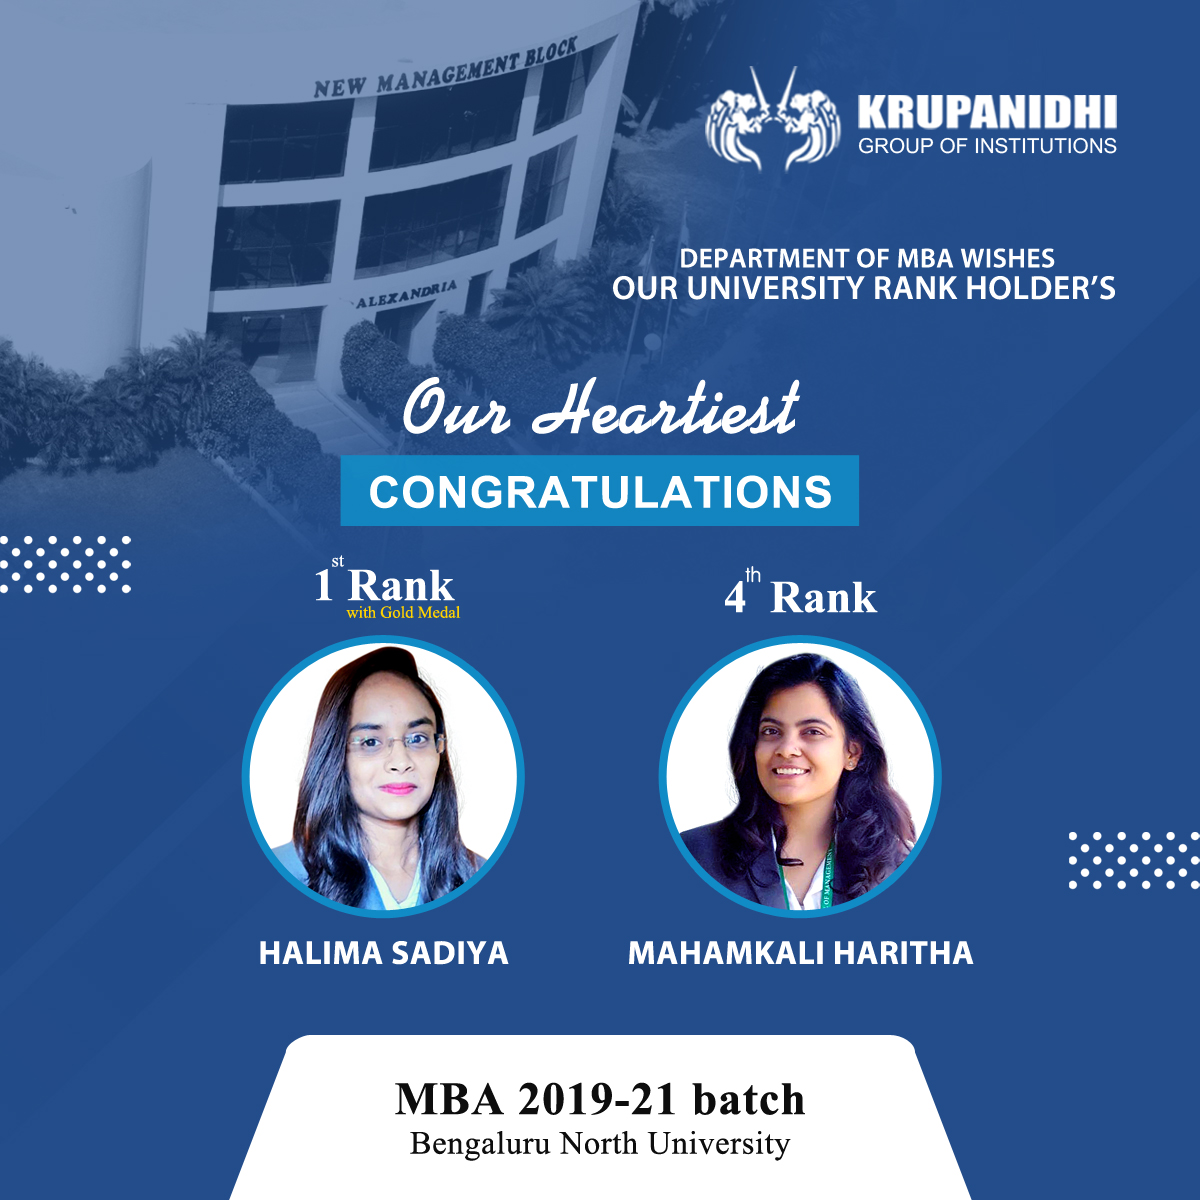 Our Heartiest Congratulations to our University Rank Holder's of MBA Department